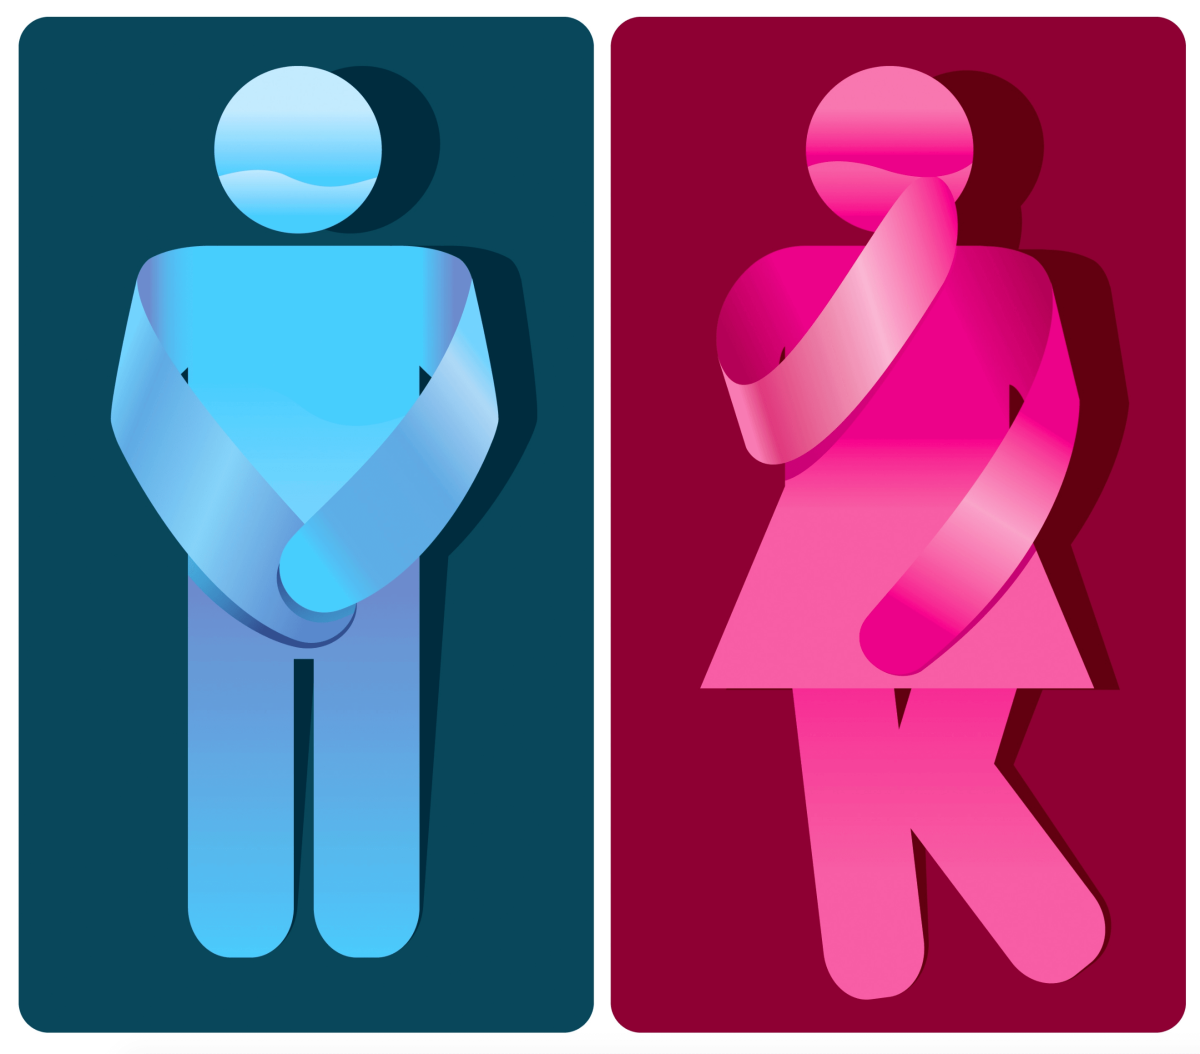 5 Life Hacks to Ease Incontinence